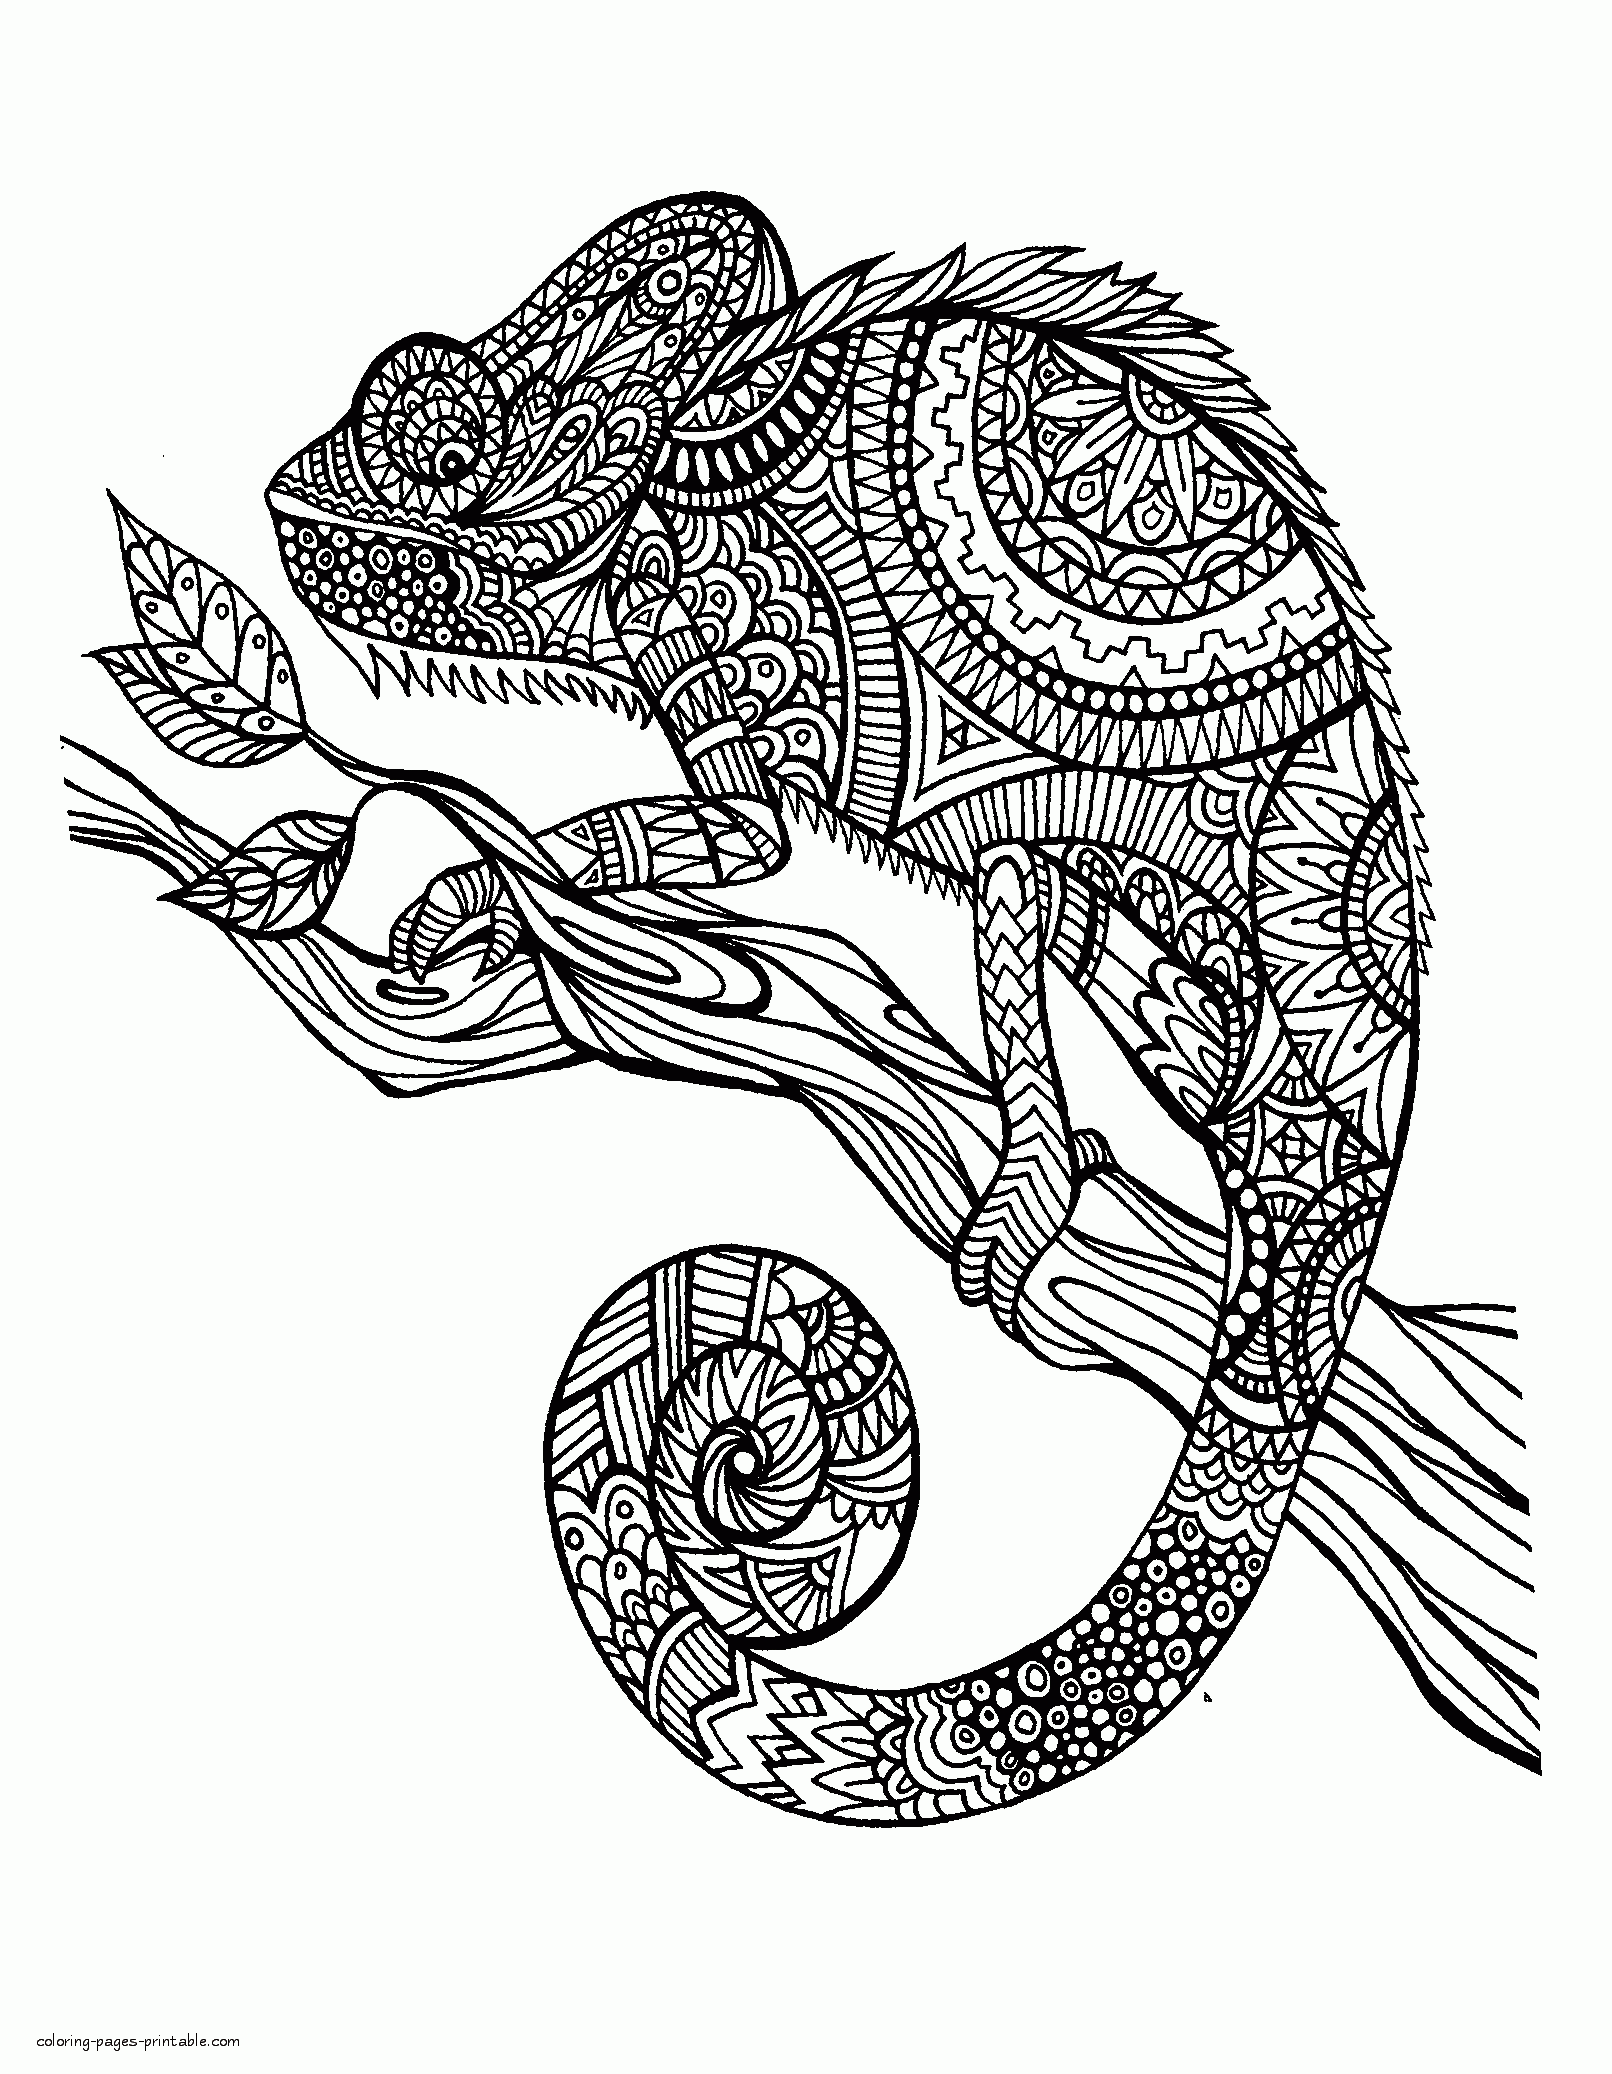 Chameleon Coloring Page For Adults